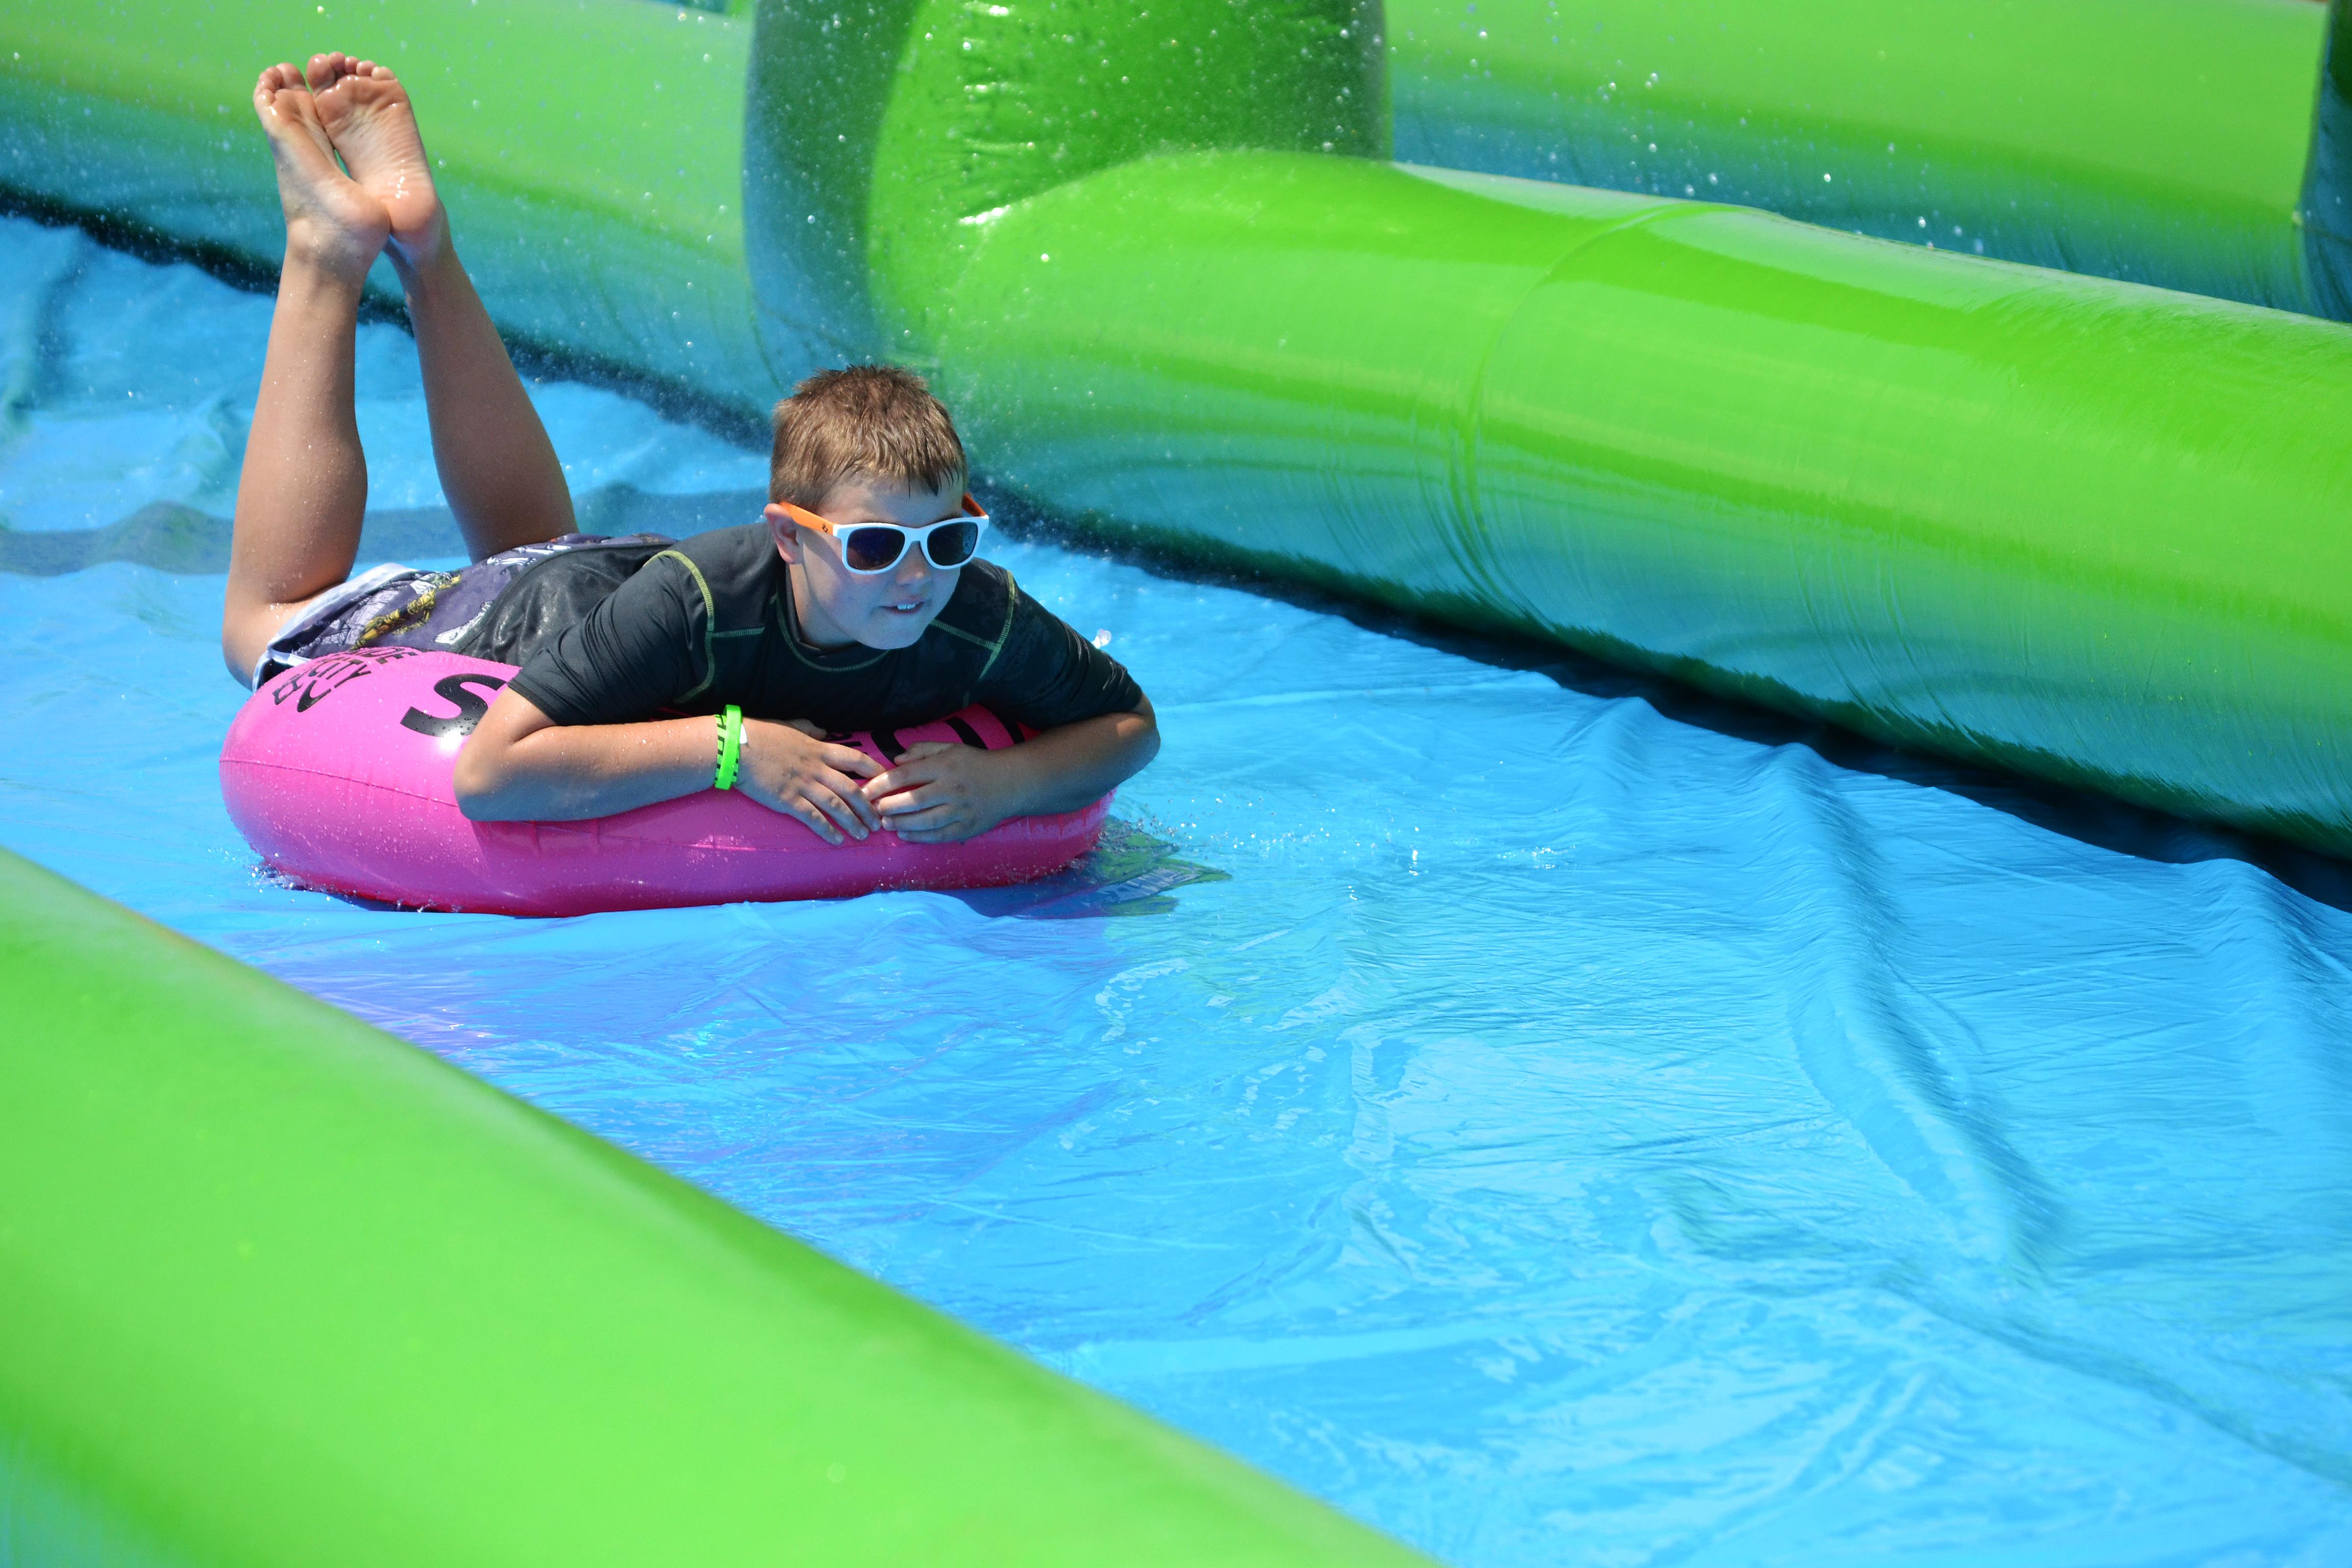 A young boy on an innertube skims across a colorful slip and slide